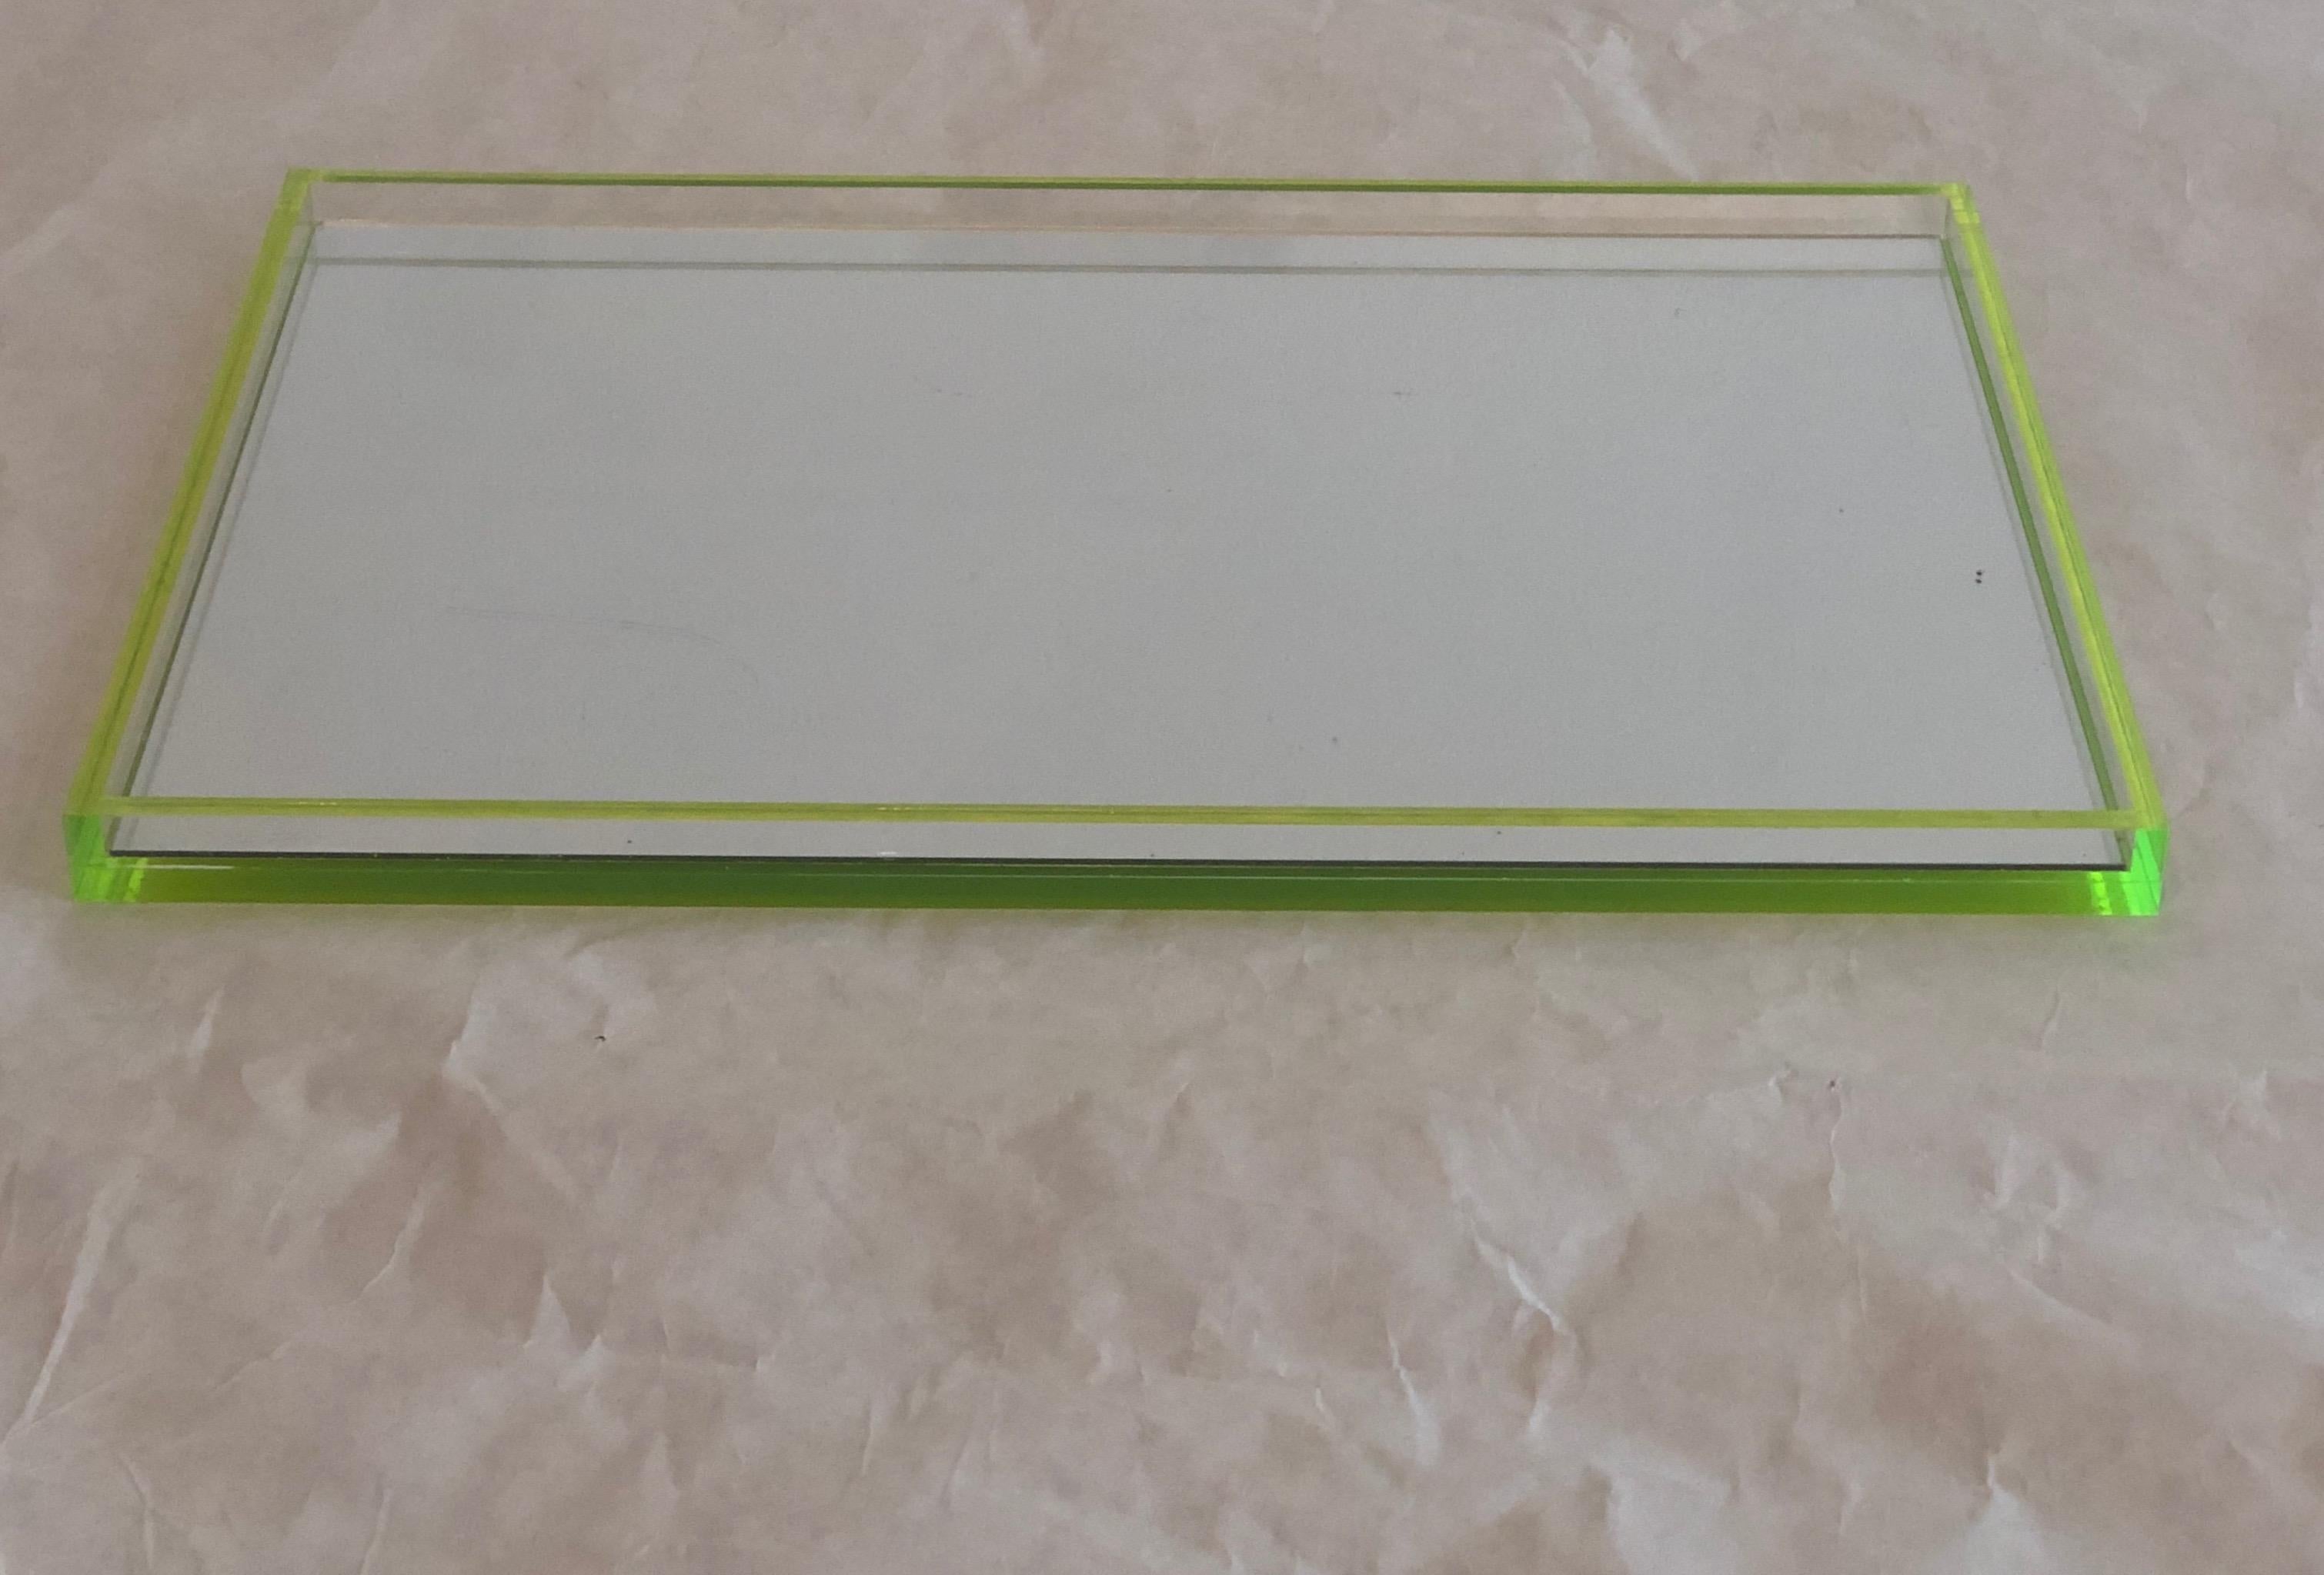 Offered is an early 2000 signed Tinsley Mortimer clear Lucite with neon lime green accents and mirror base cocktail ware / drinks’ tray. This tray has so many other possible uses as well. The neon lime green accents are so on trend. The Lucite used